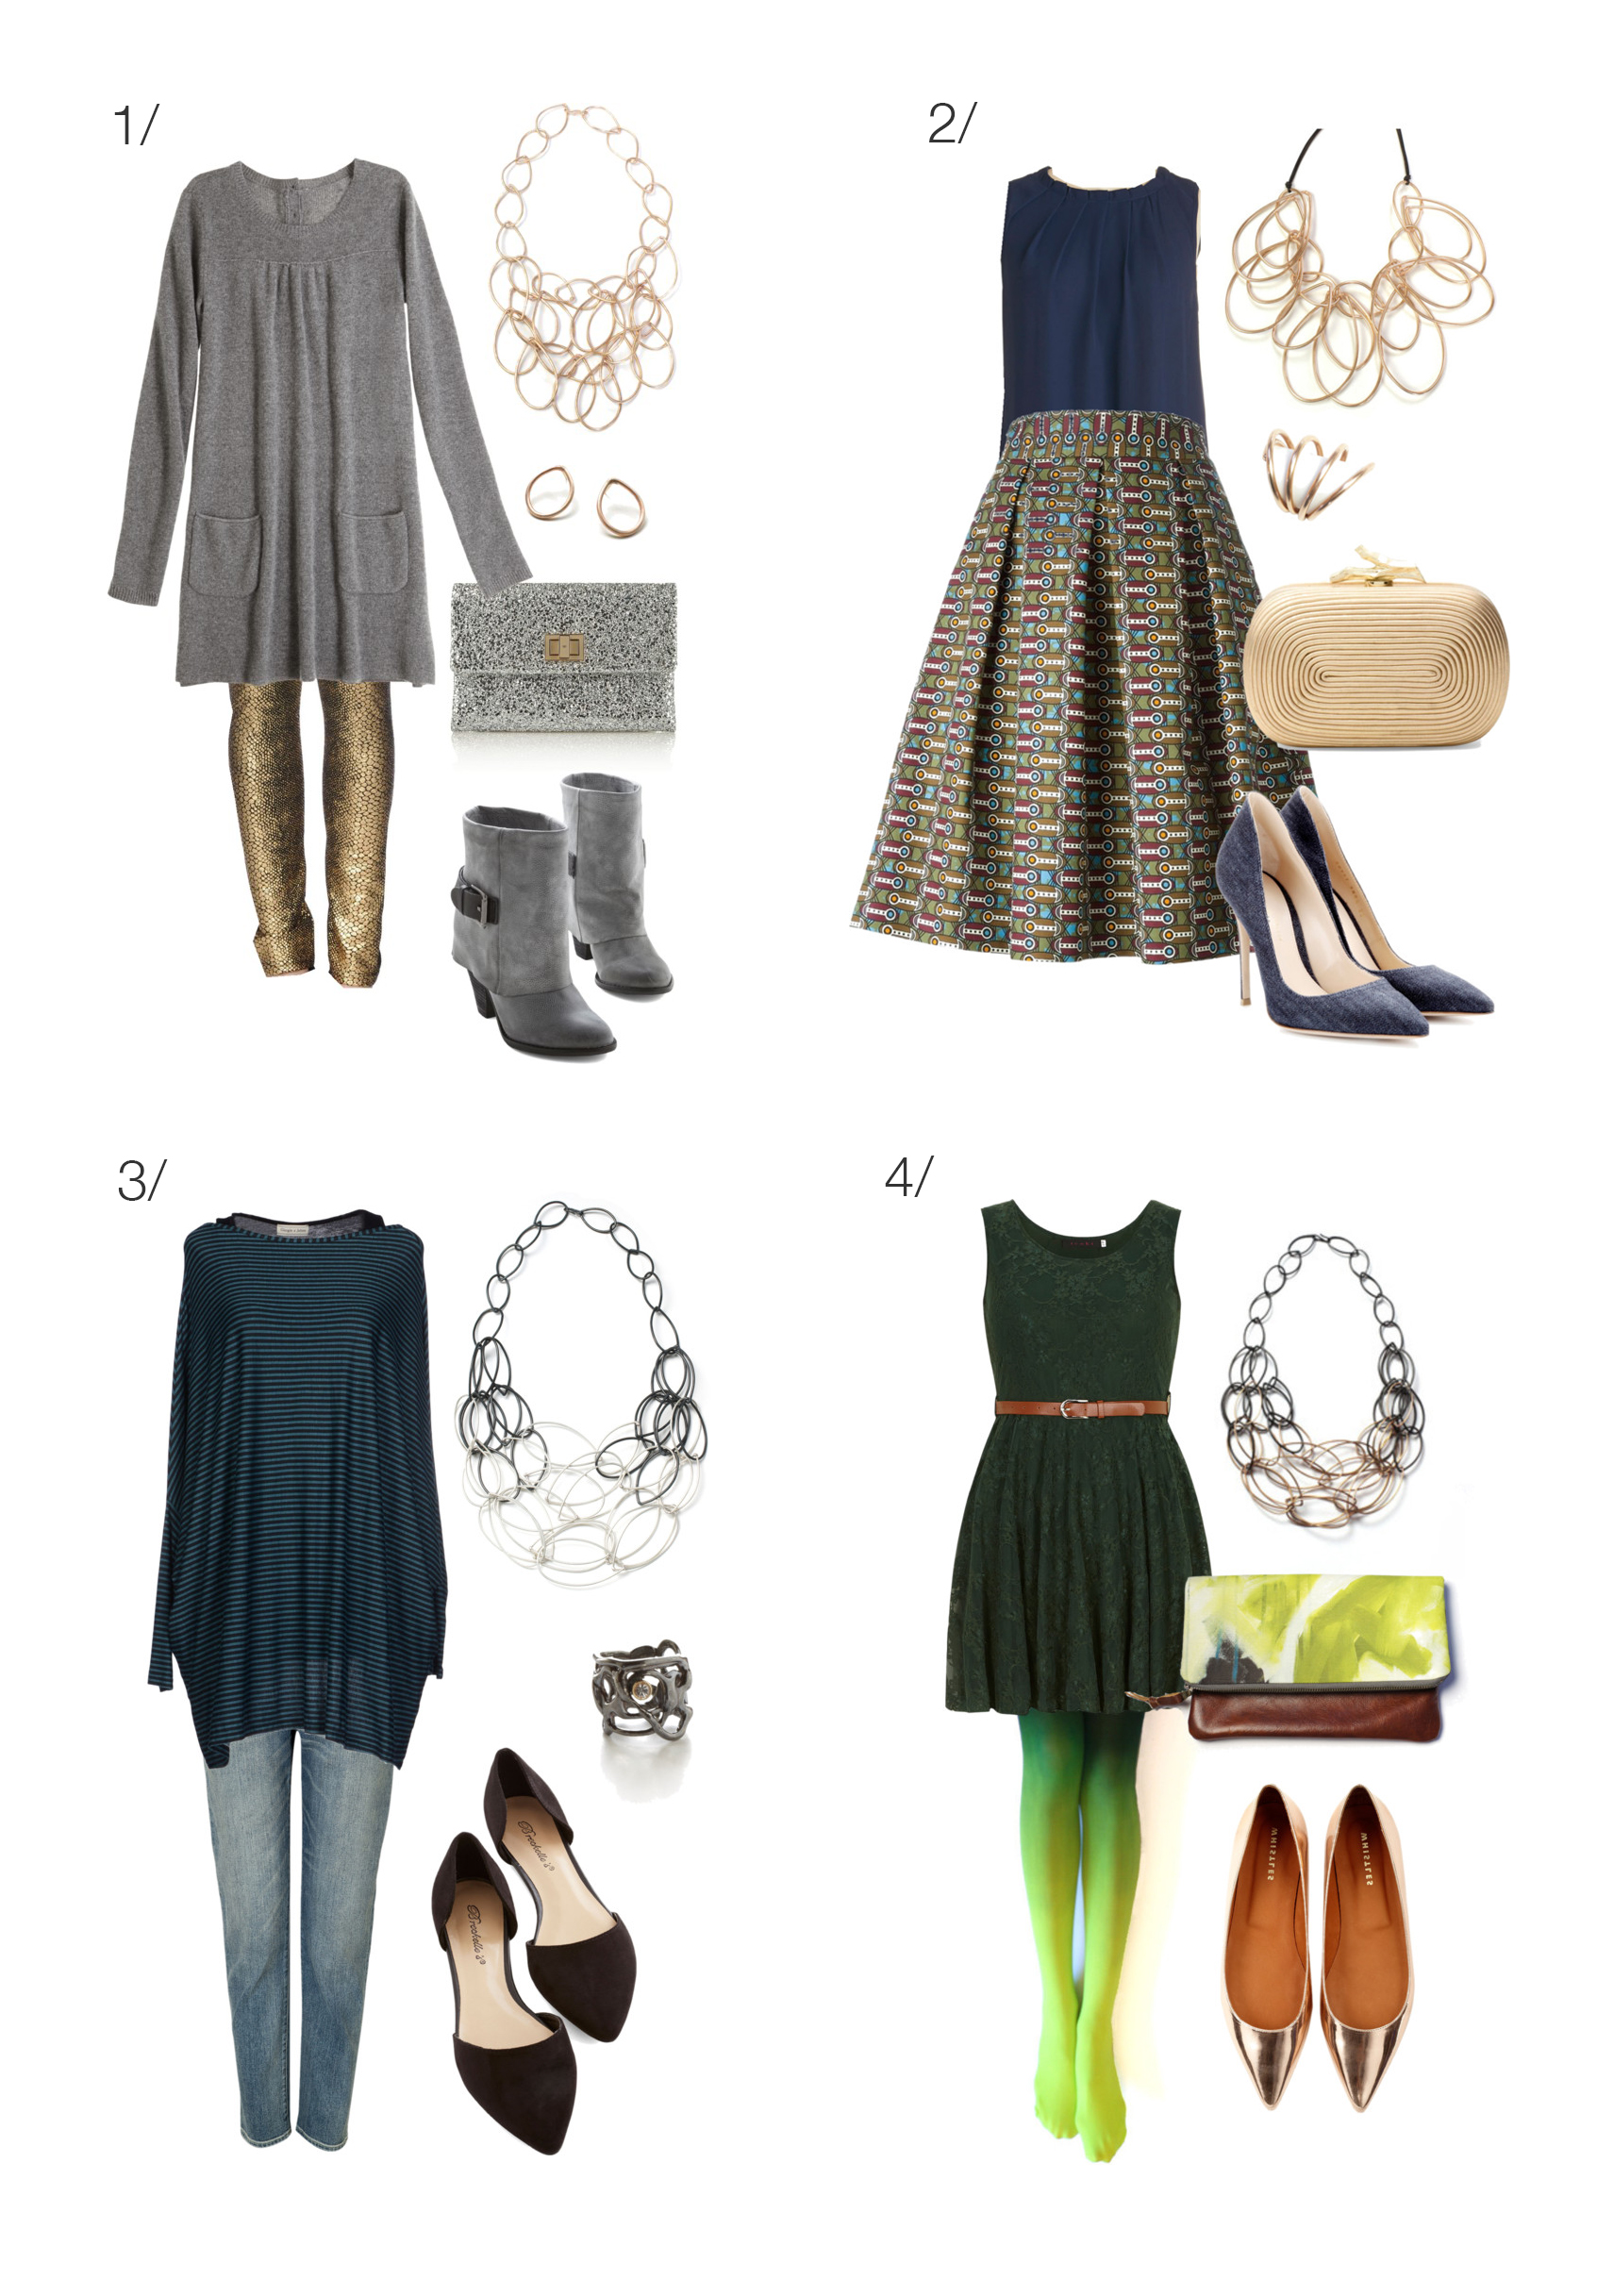 8 outfit ideas that are perfect for a holiday party - MEGAN AUMAN